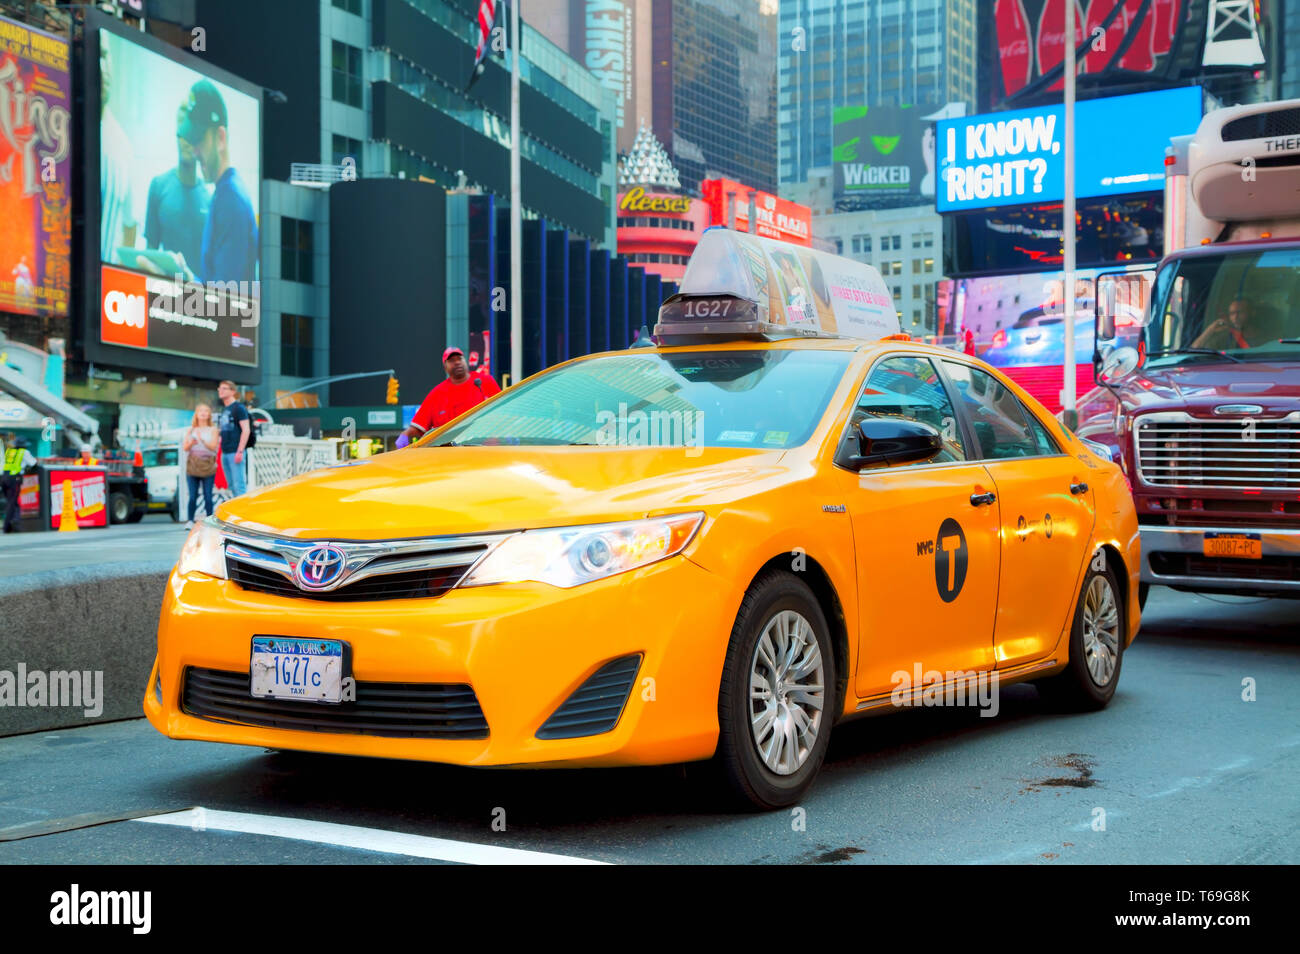 Yellow cab am Times Square in New York City Stockfoto